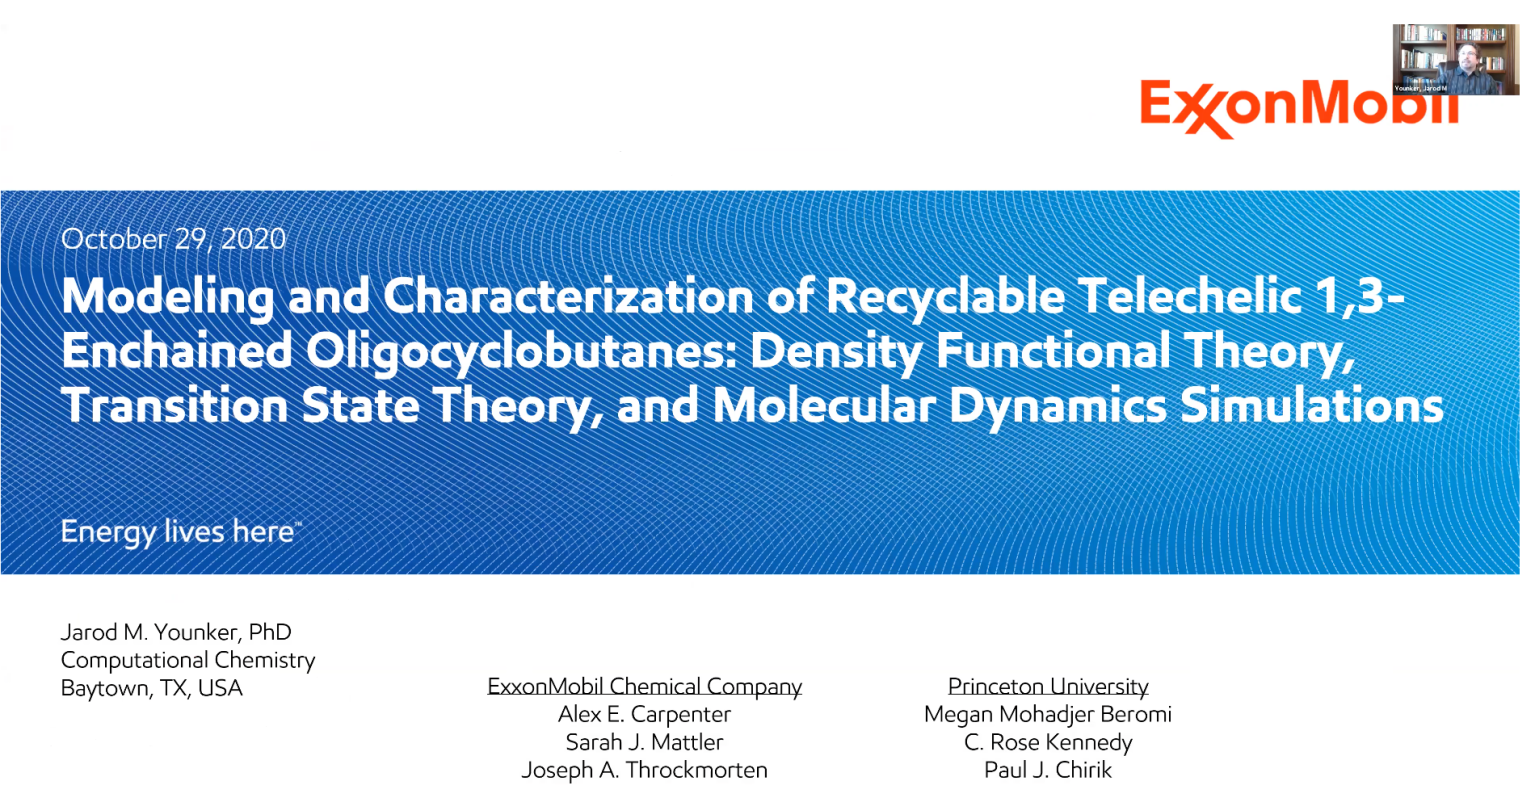 Modeling and Characterization of Recyclable Telechelic 1,3-Enchained Oligocyclobutanes: Density Functional Theory, Transition State Theory, and Molecular Dynamics Simulations